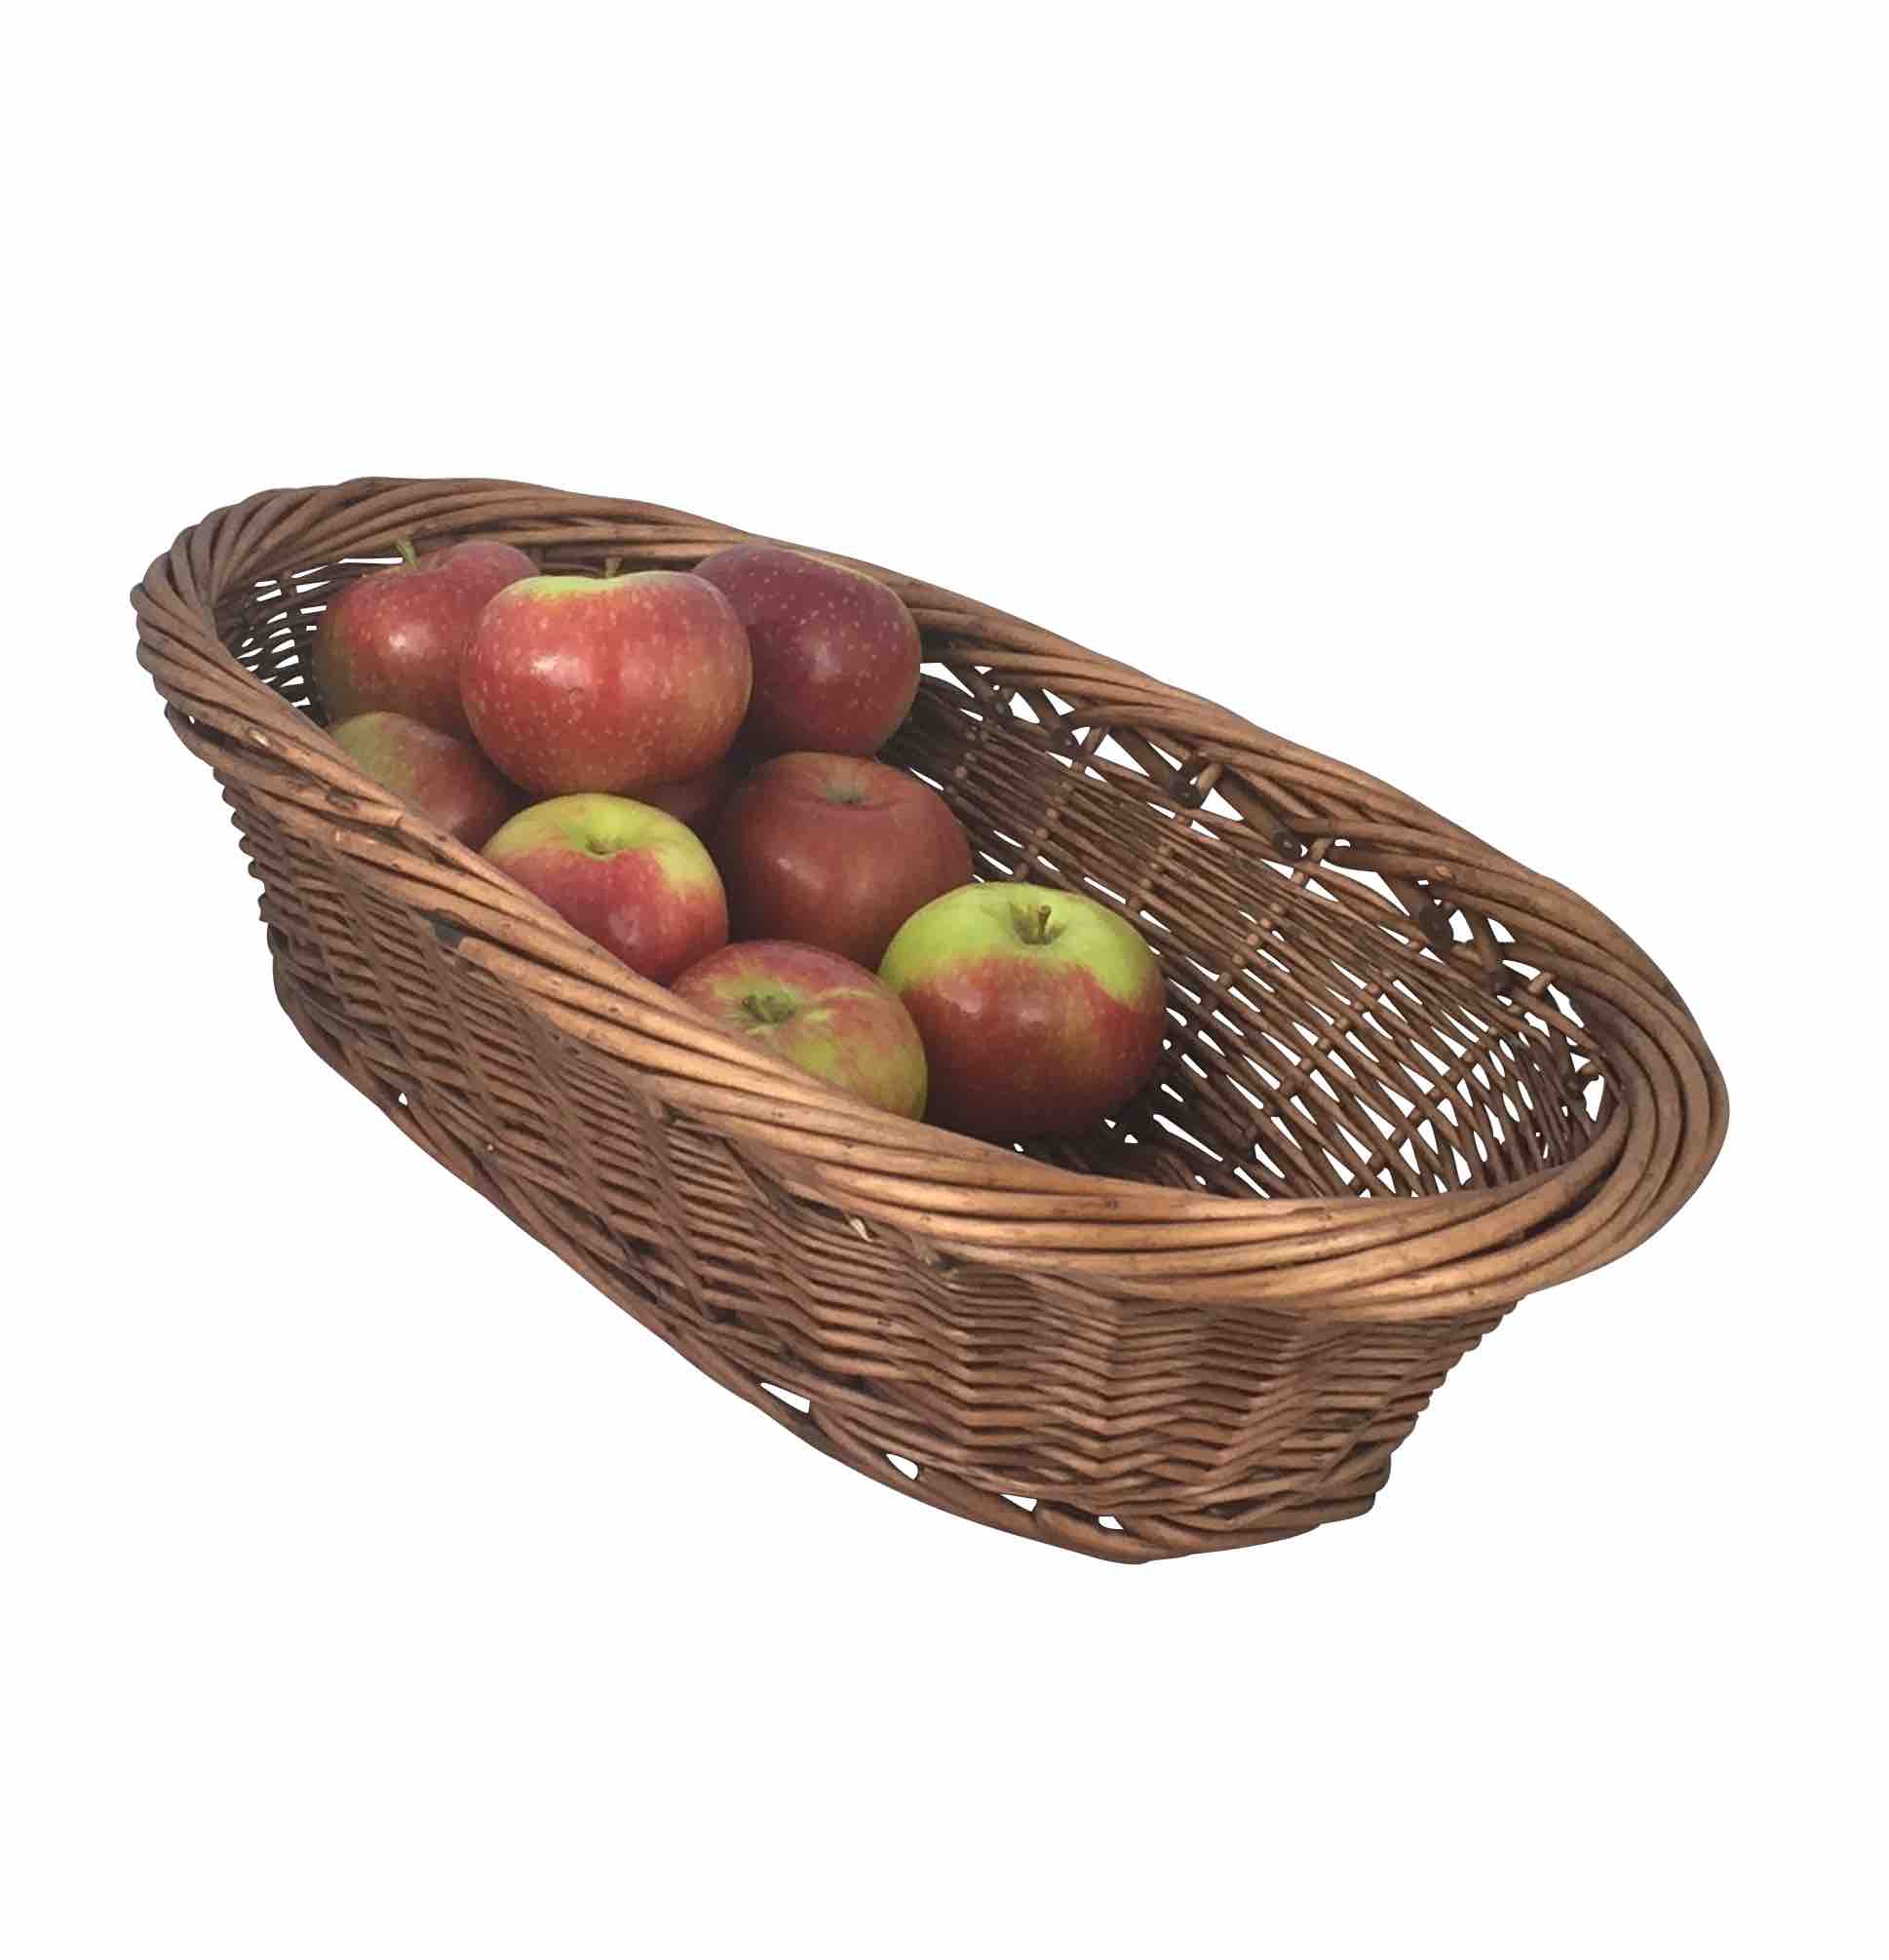 Handmade Natural Wicker Display Baskets for Produce | DGS Retail